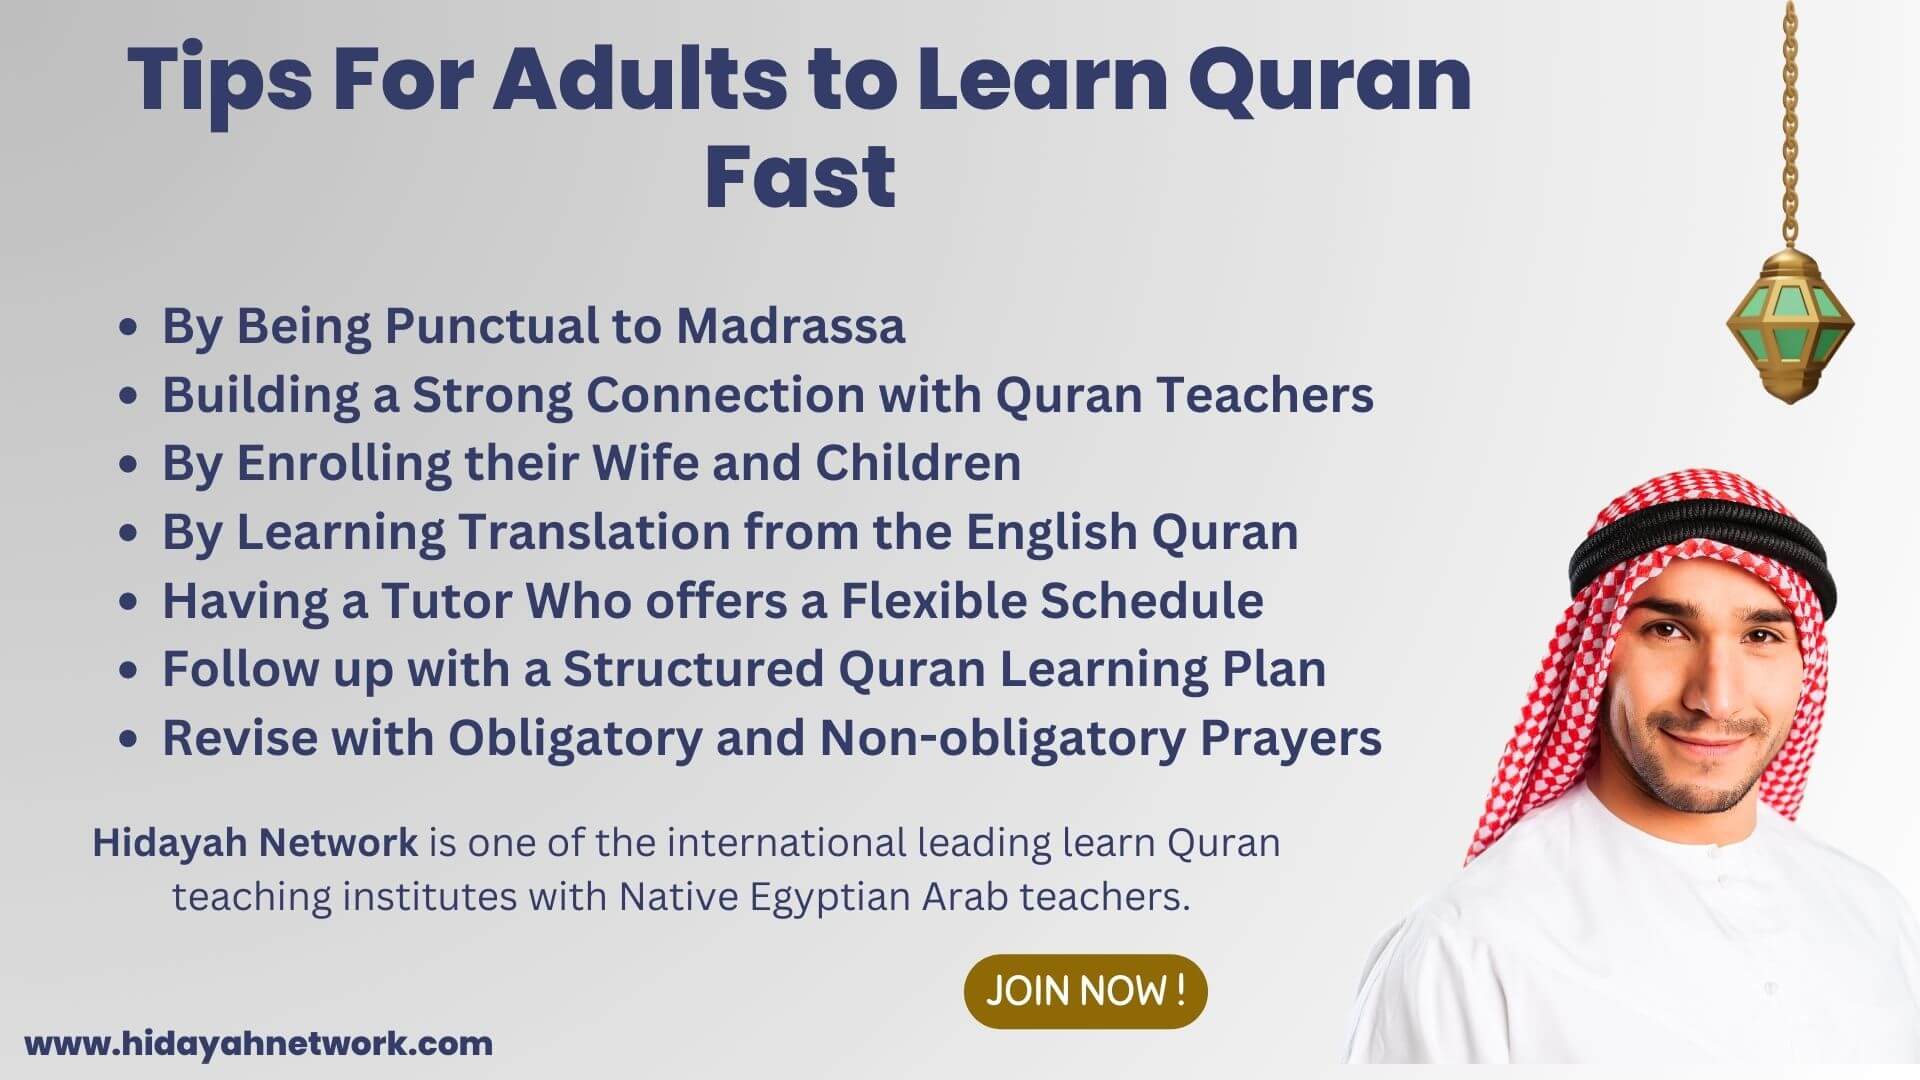 Tips For Adults to Learn Quran Fast